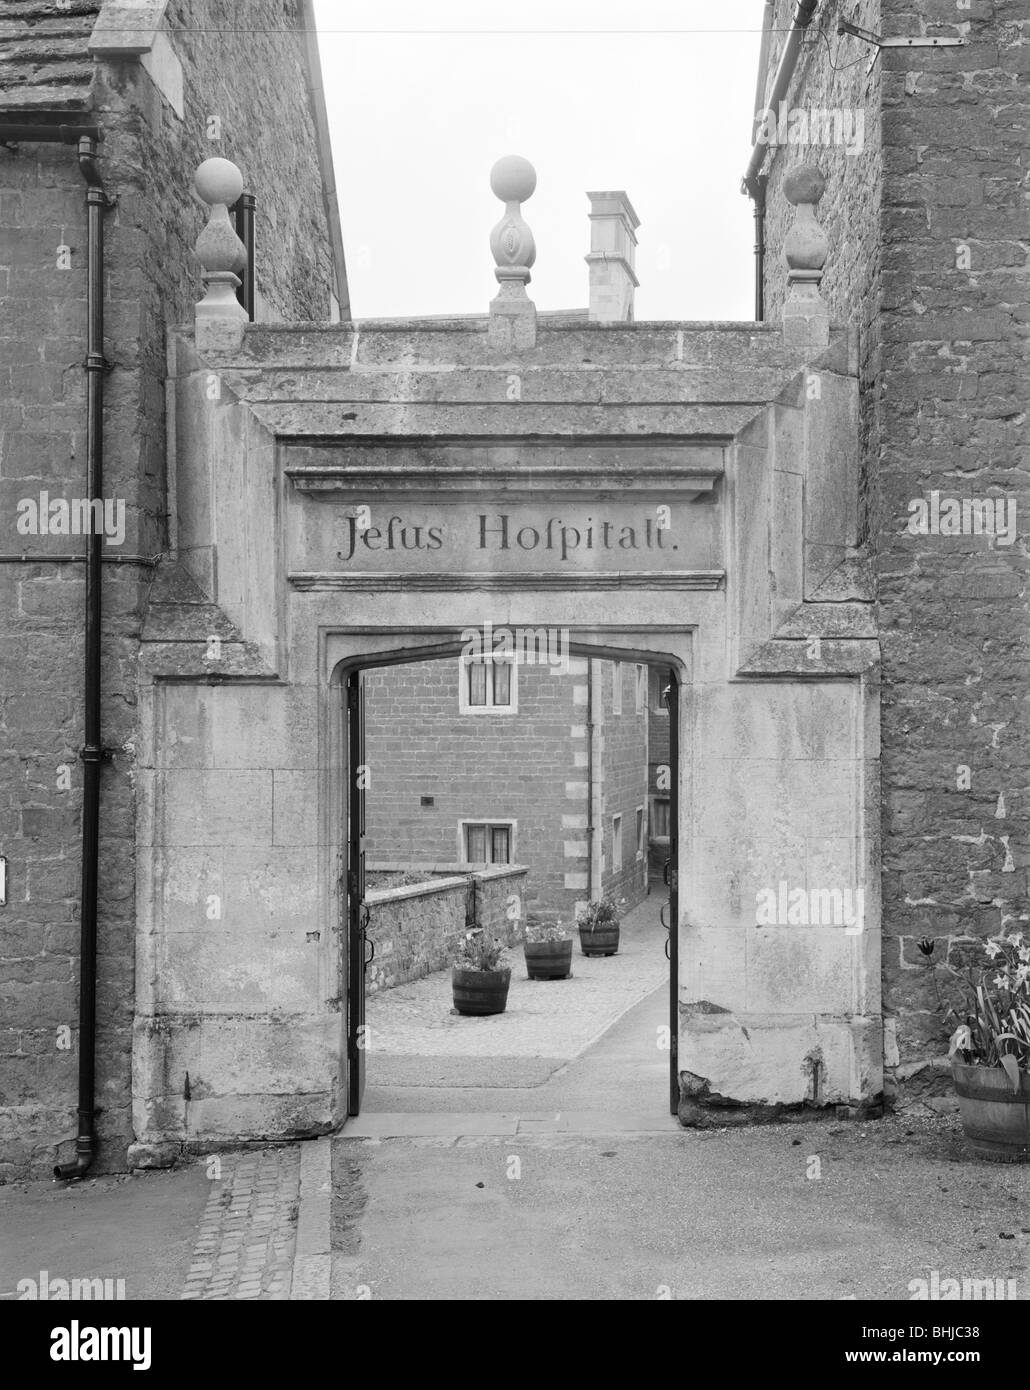 Ingresso Nord arch, Gesù Ospedale, Rothwell, Northamptonshire, 1999. Artista: P Payne Foto Stock